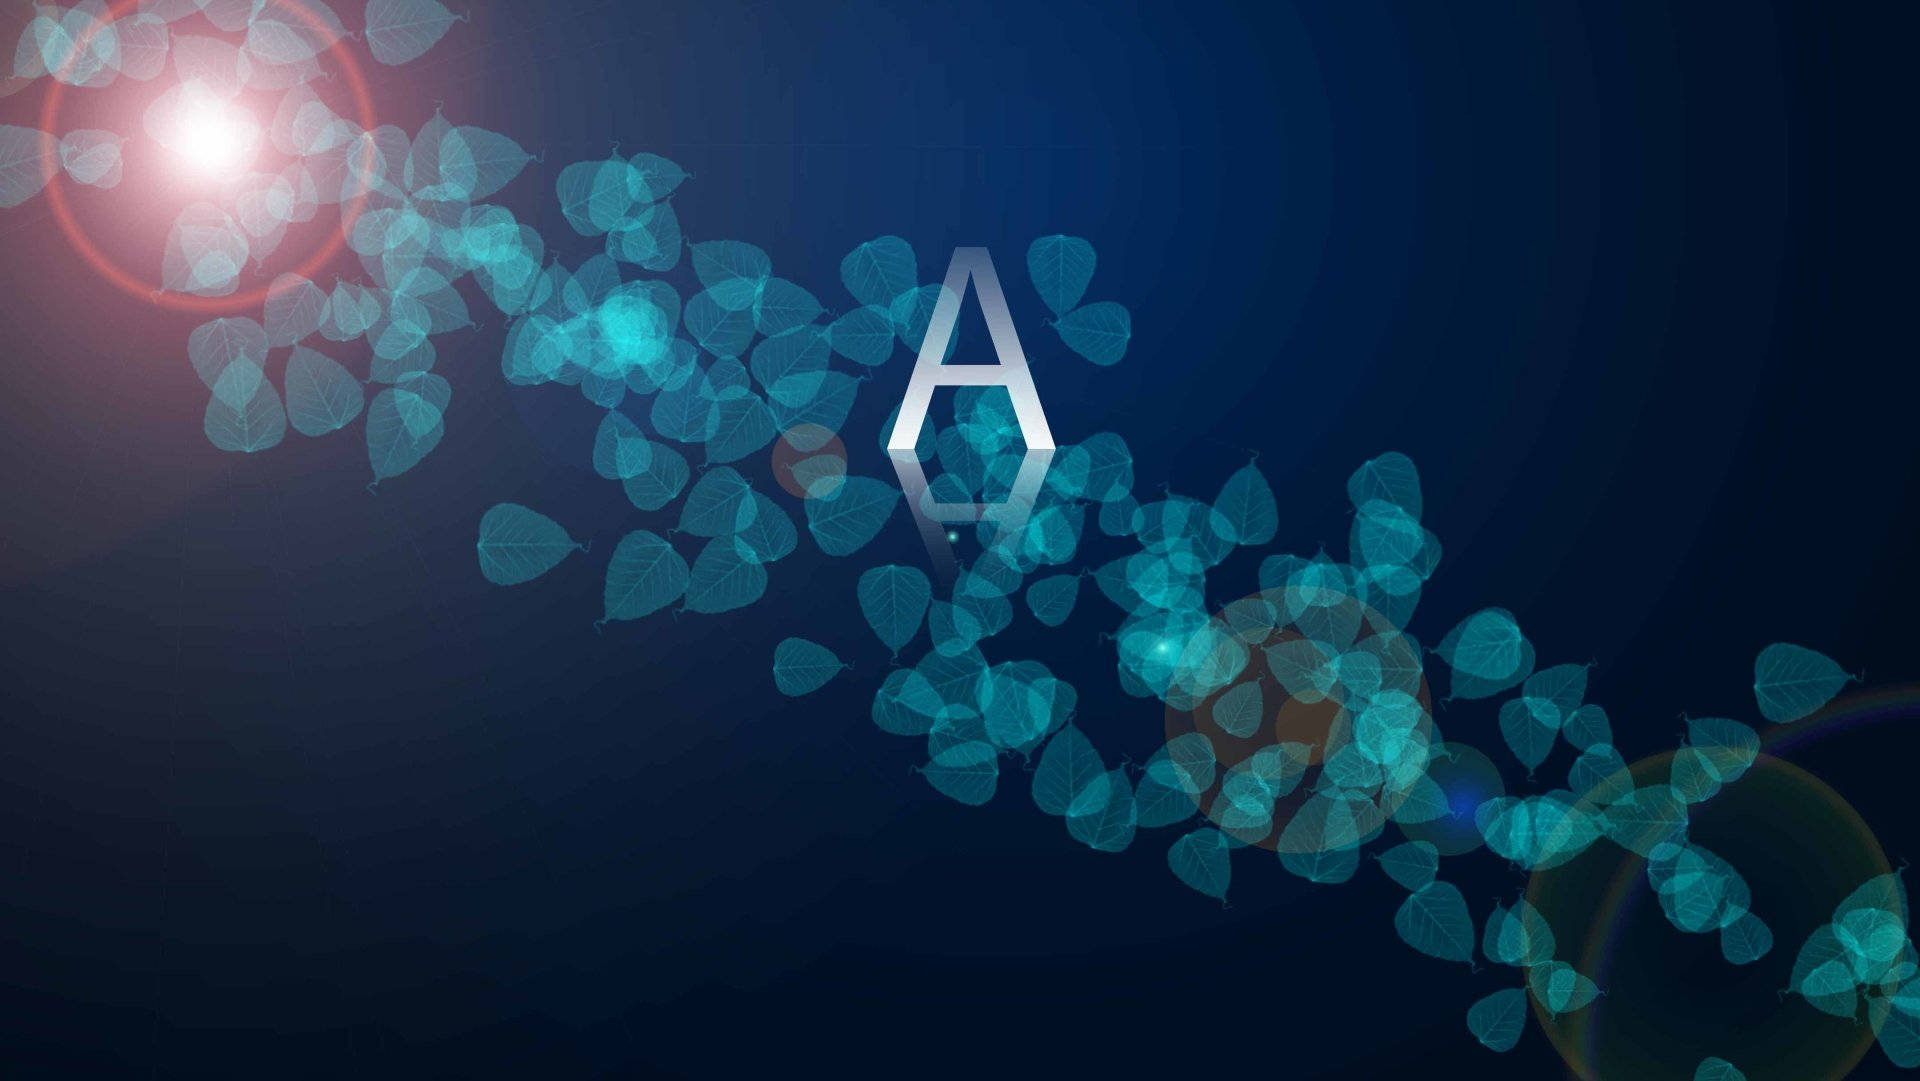 Artistic Representation Of Letter A Surrounded By Blue Leaves Background